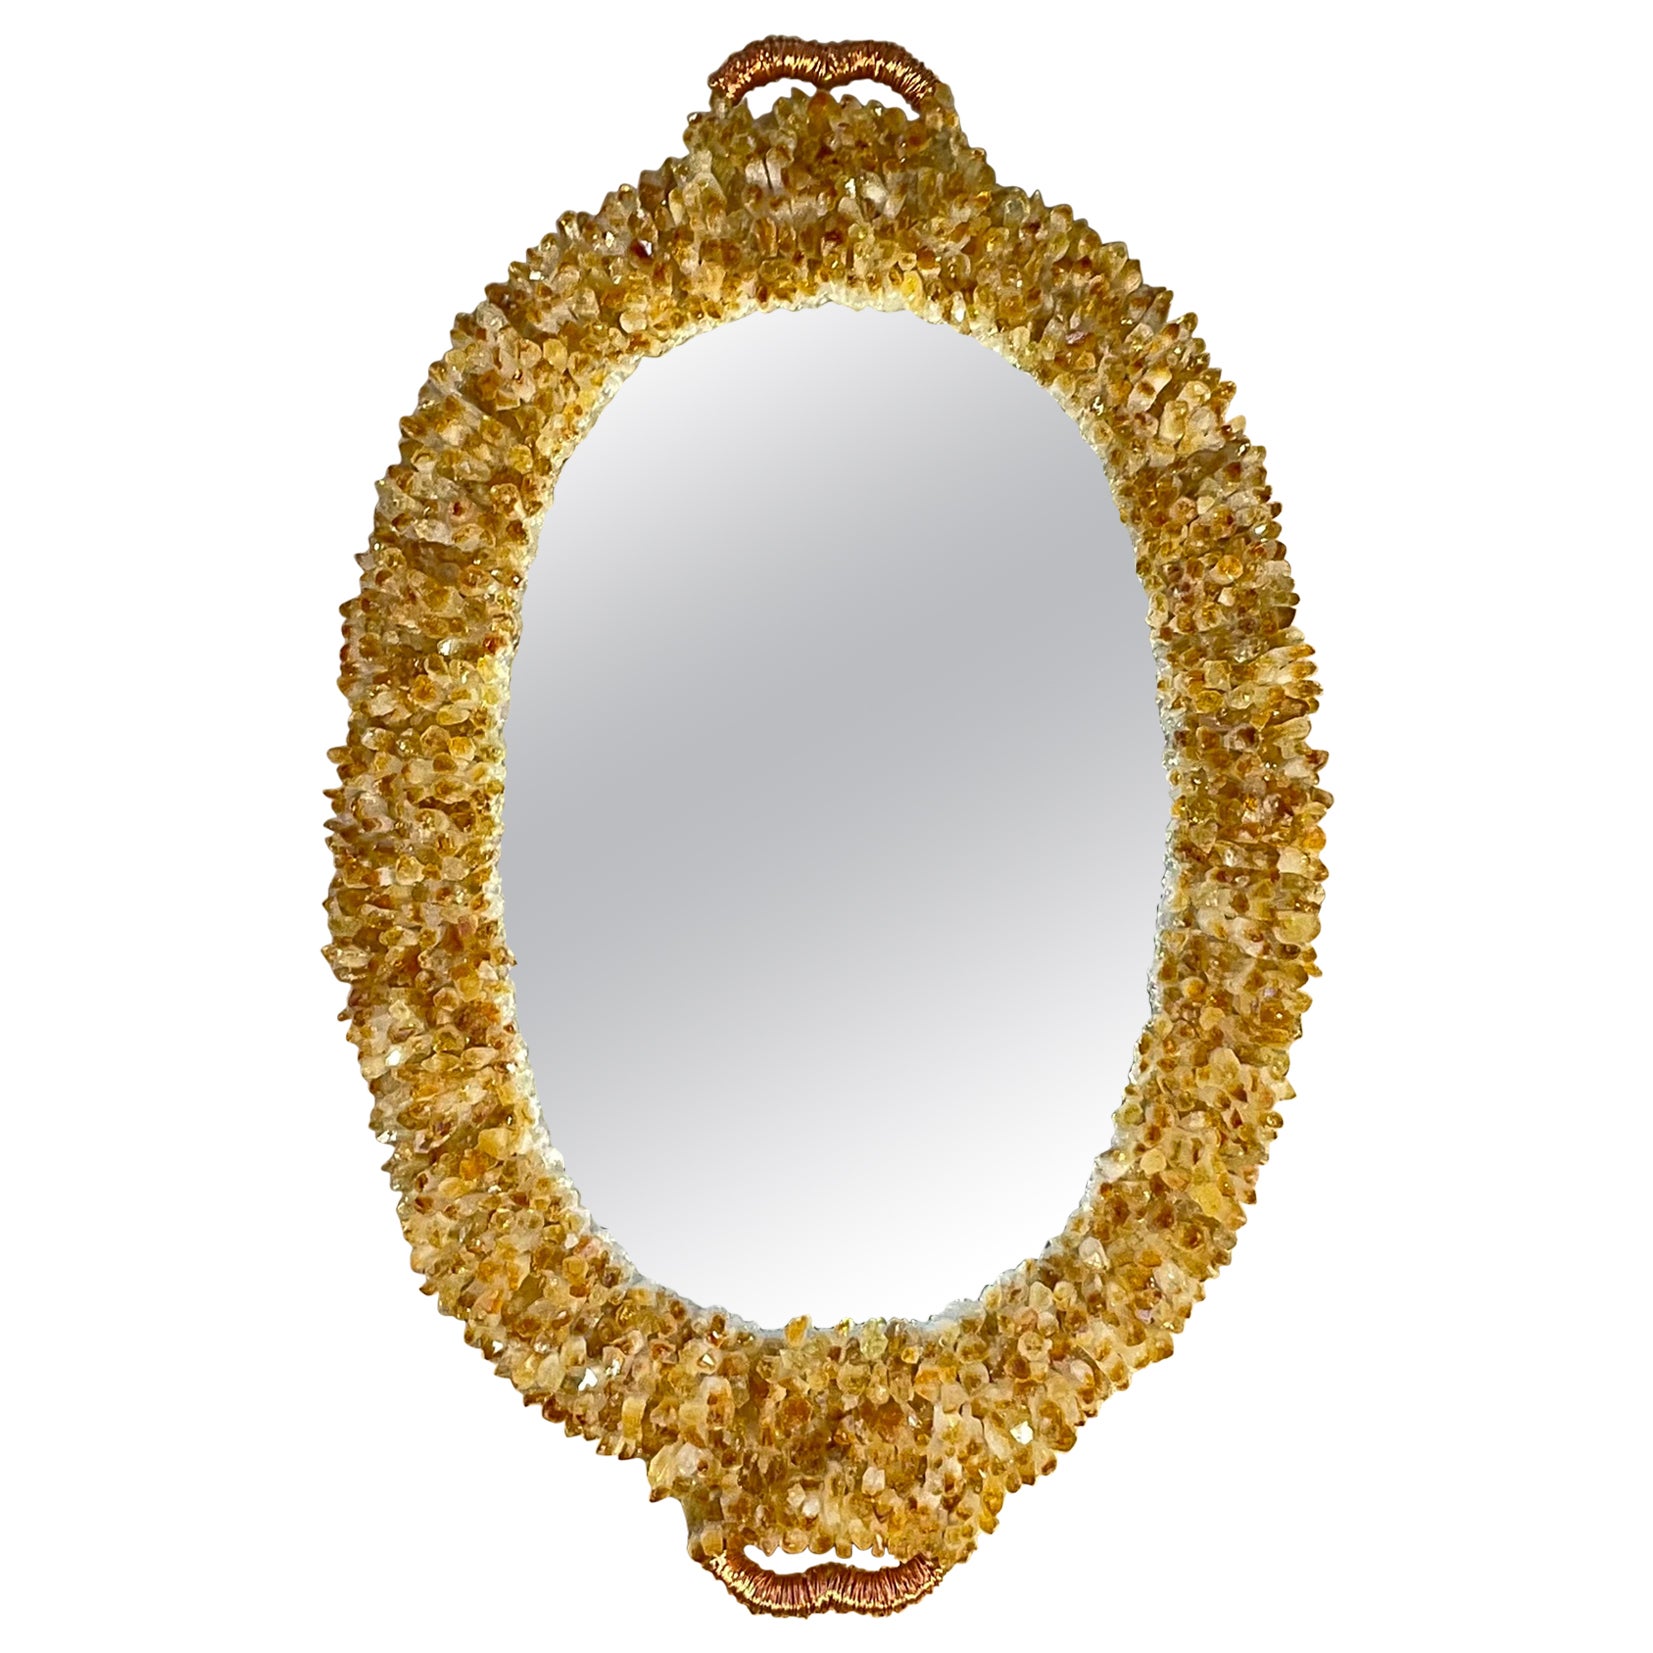 One of a Kind Oval Citrine Crystal Quartz Wall Mirror For Sale